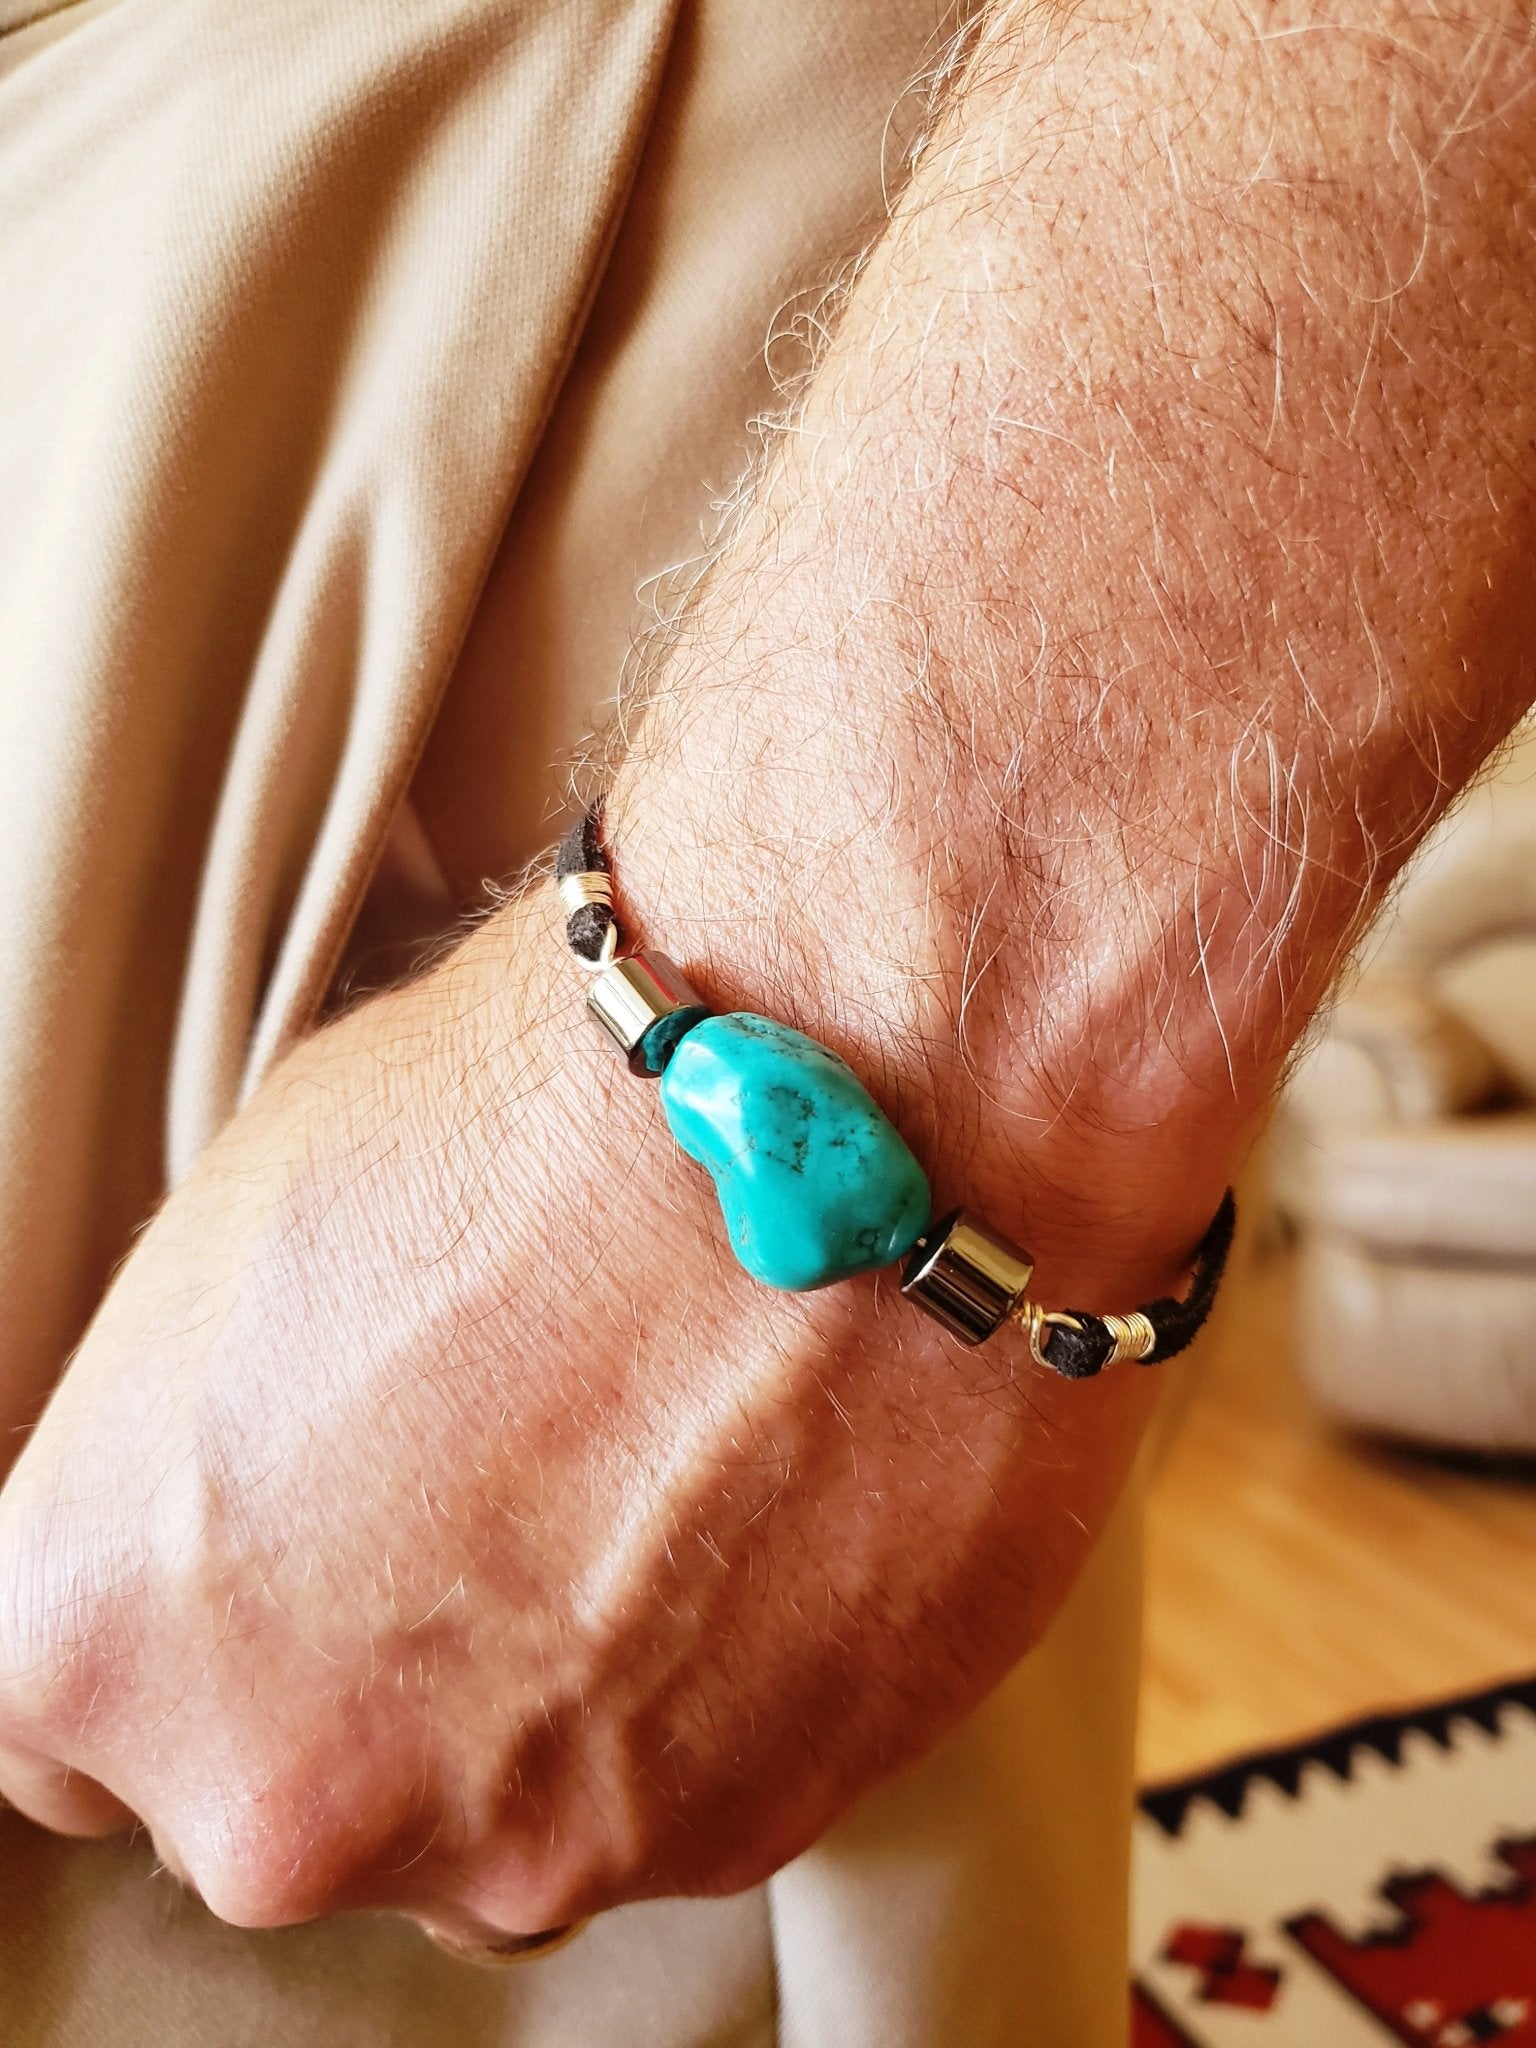 What is the benefit of turquoise jewelry? - Quora